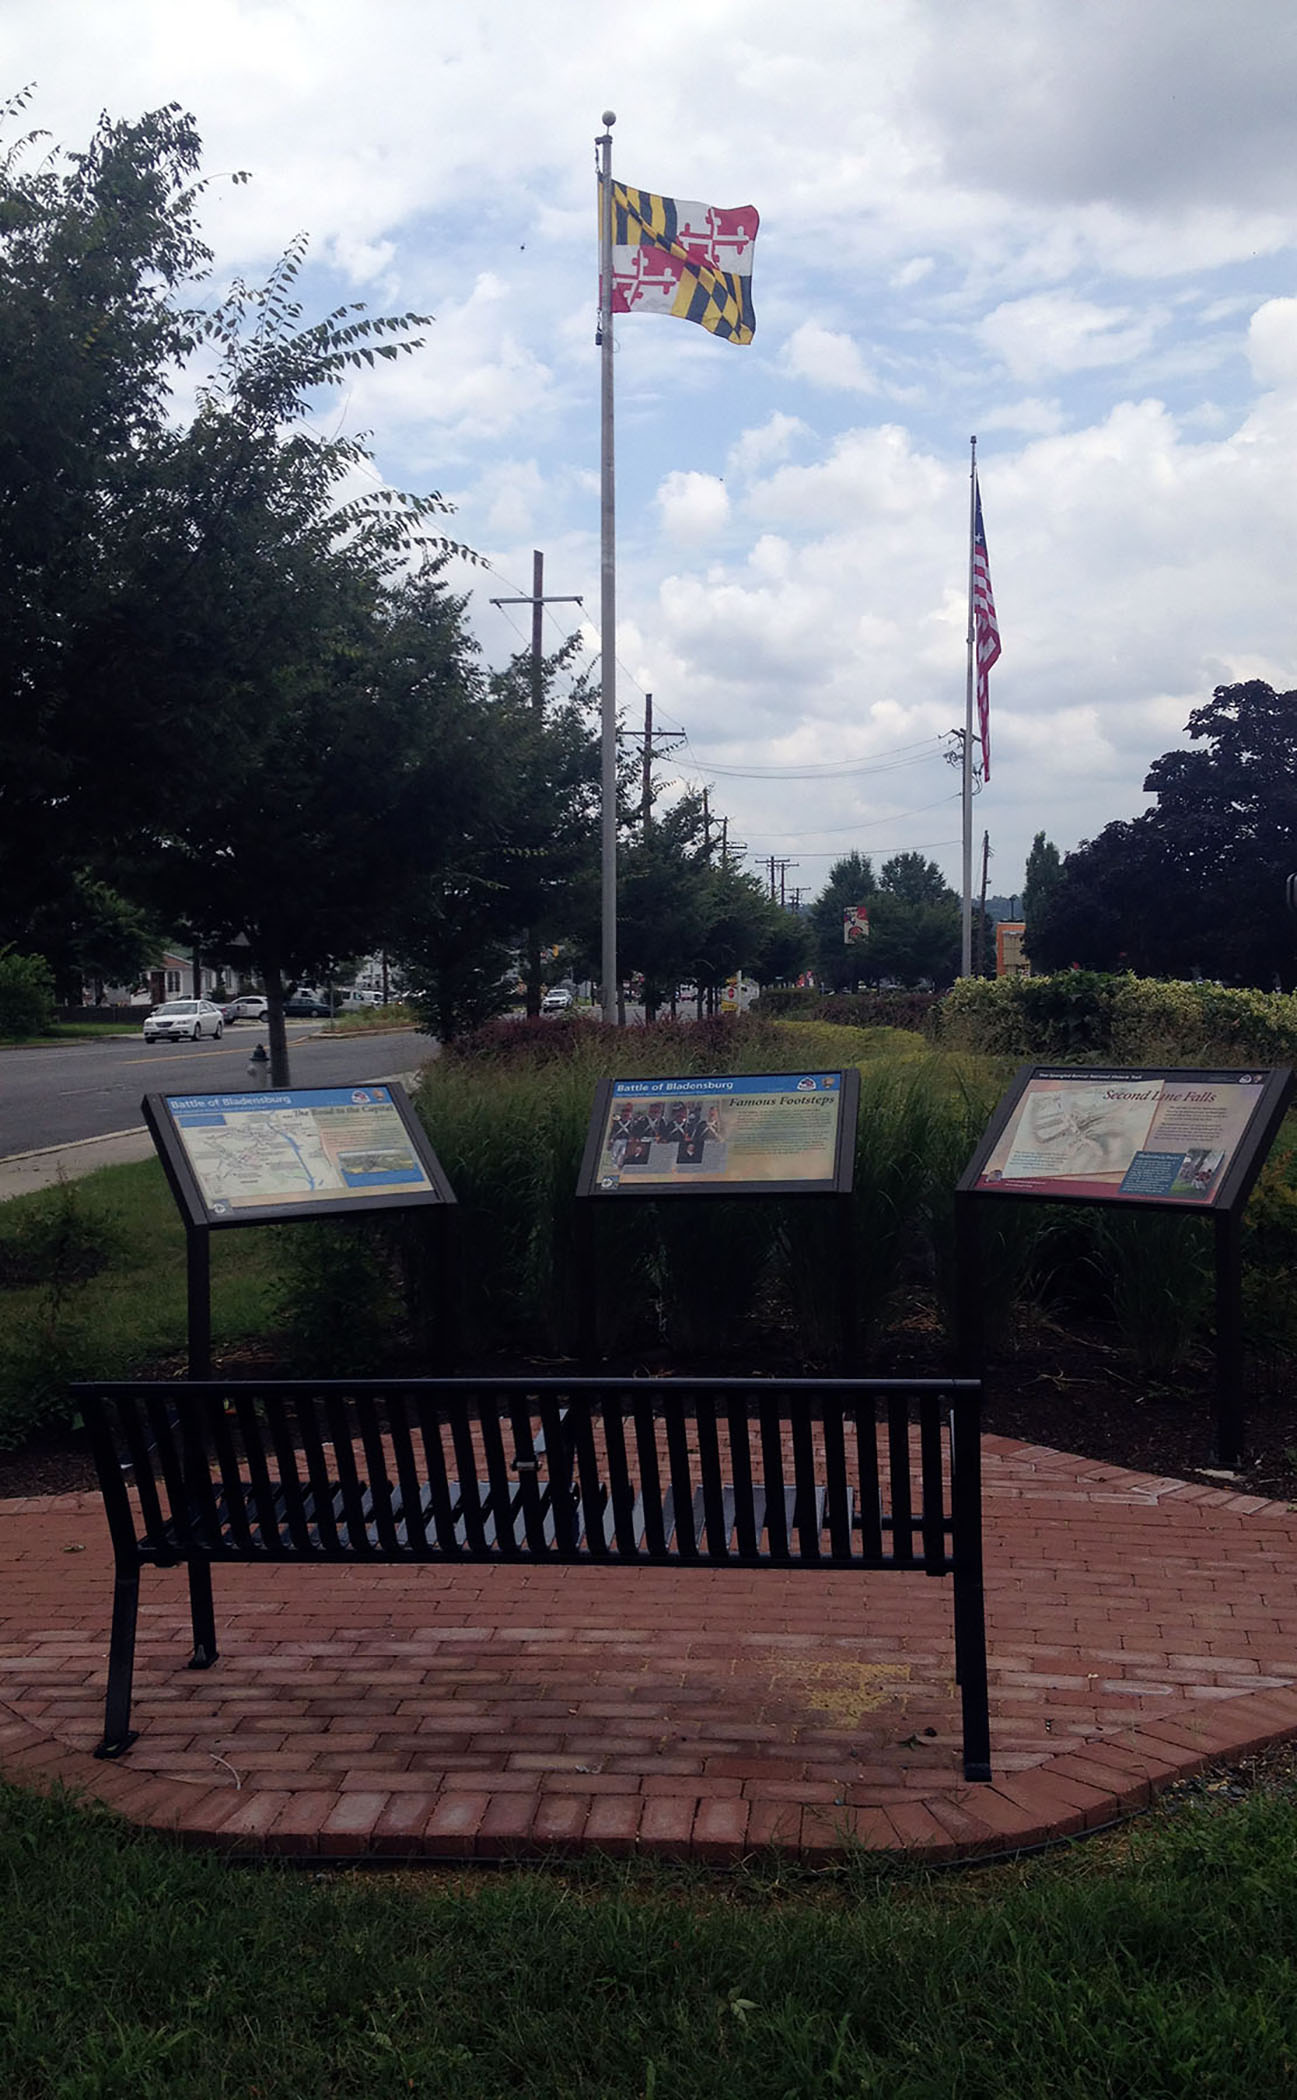 These three waysides were designed for a pocket park to commemorate the War of 1812.